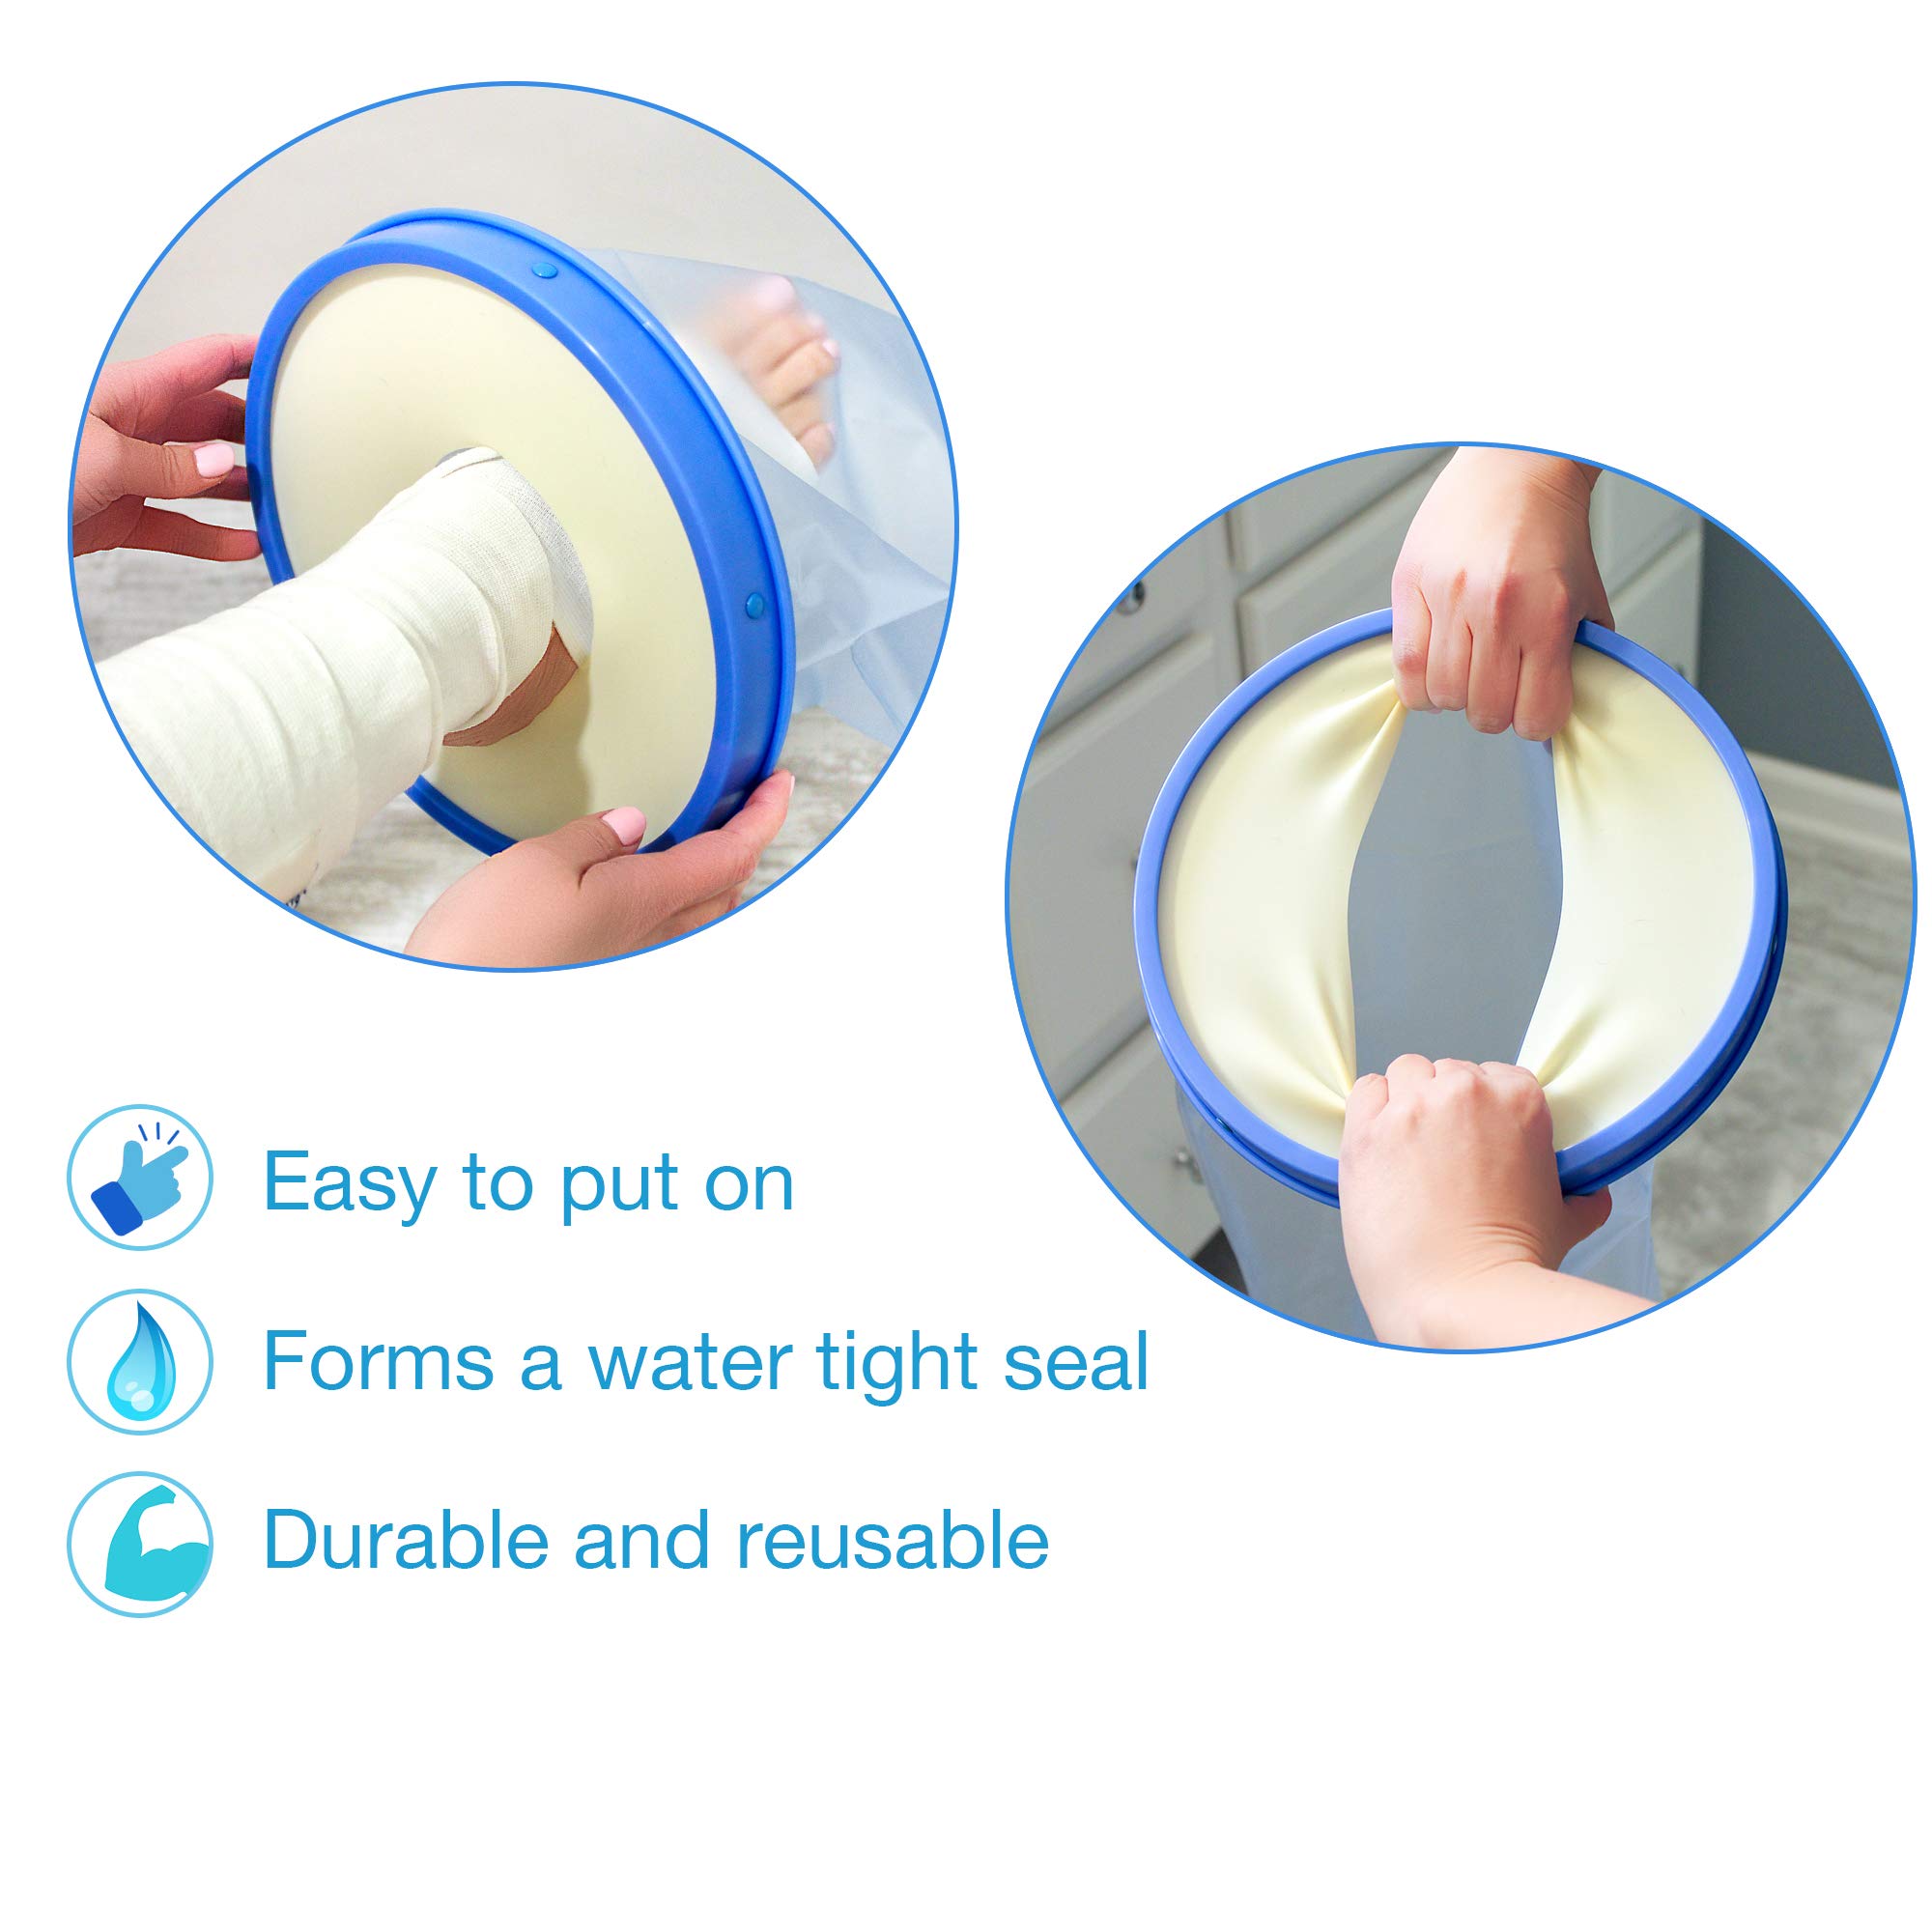 DMI Waterproof Cast Cover Wound Barrier and Bandage Protector Reusable with a Watertight Seal for Showers Baths & Pools Fits Adult Small Leg up to 23 Inches in Length, Short Leg